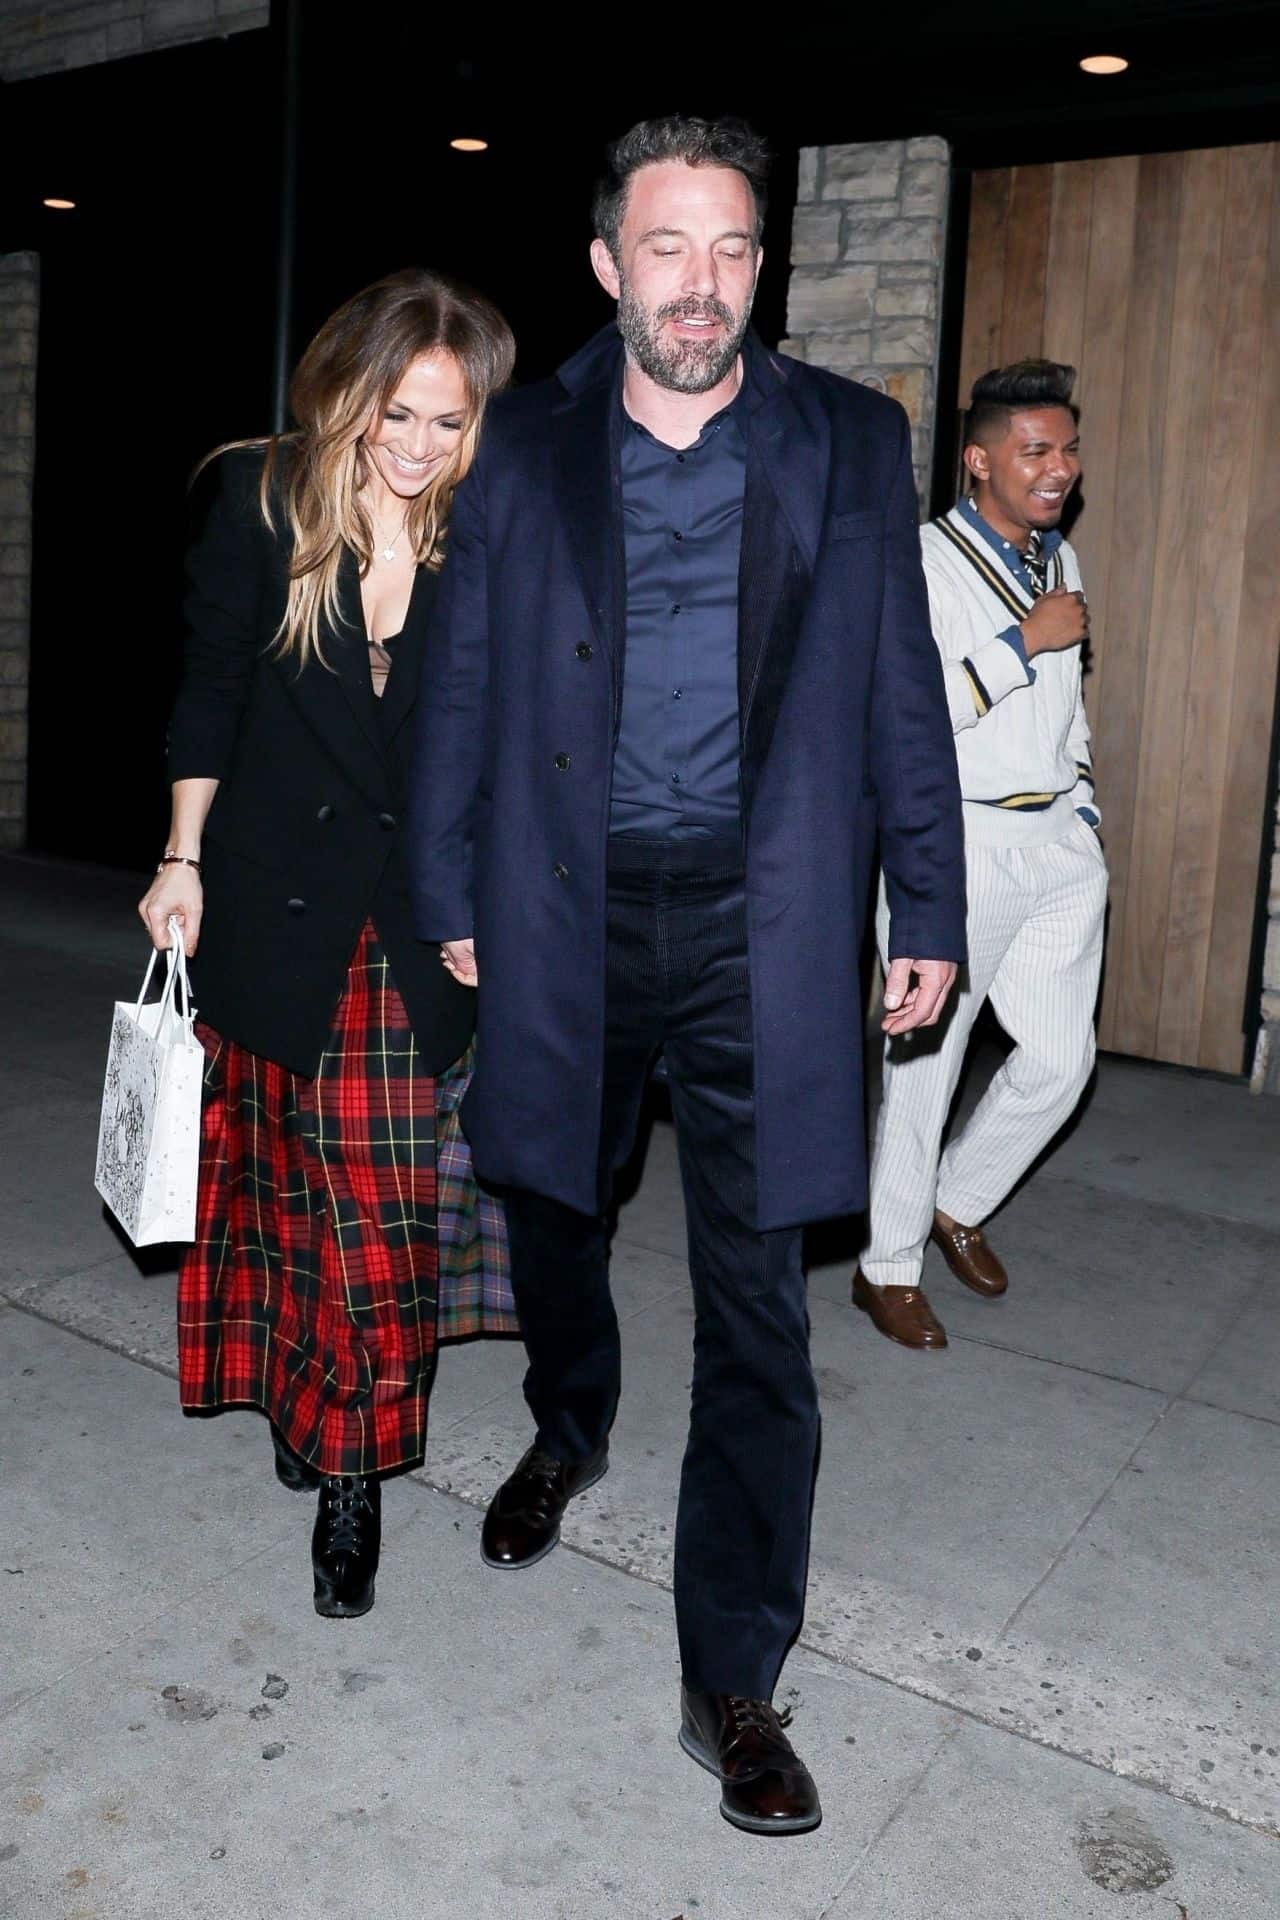 Jennifer Lopez Oozes Beauty in a Sheer Top on a Dinner Date with Affleck